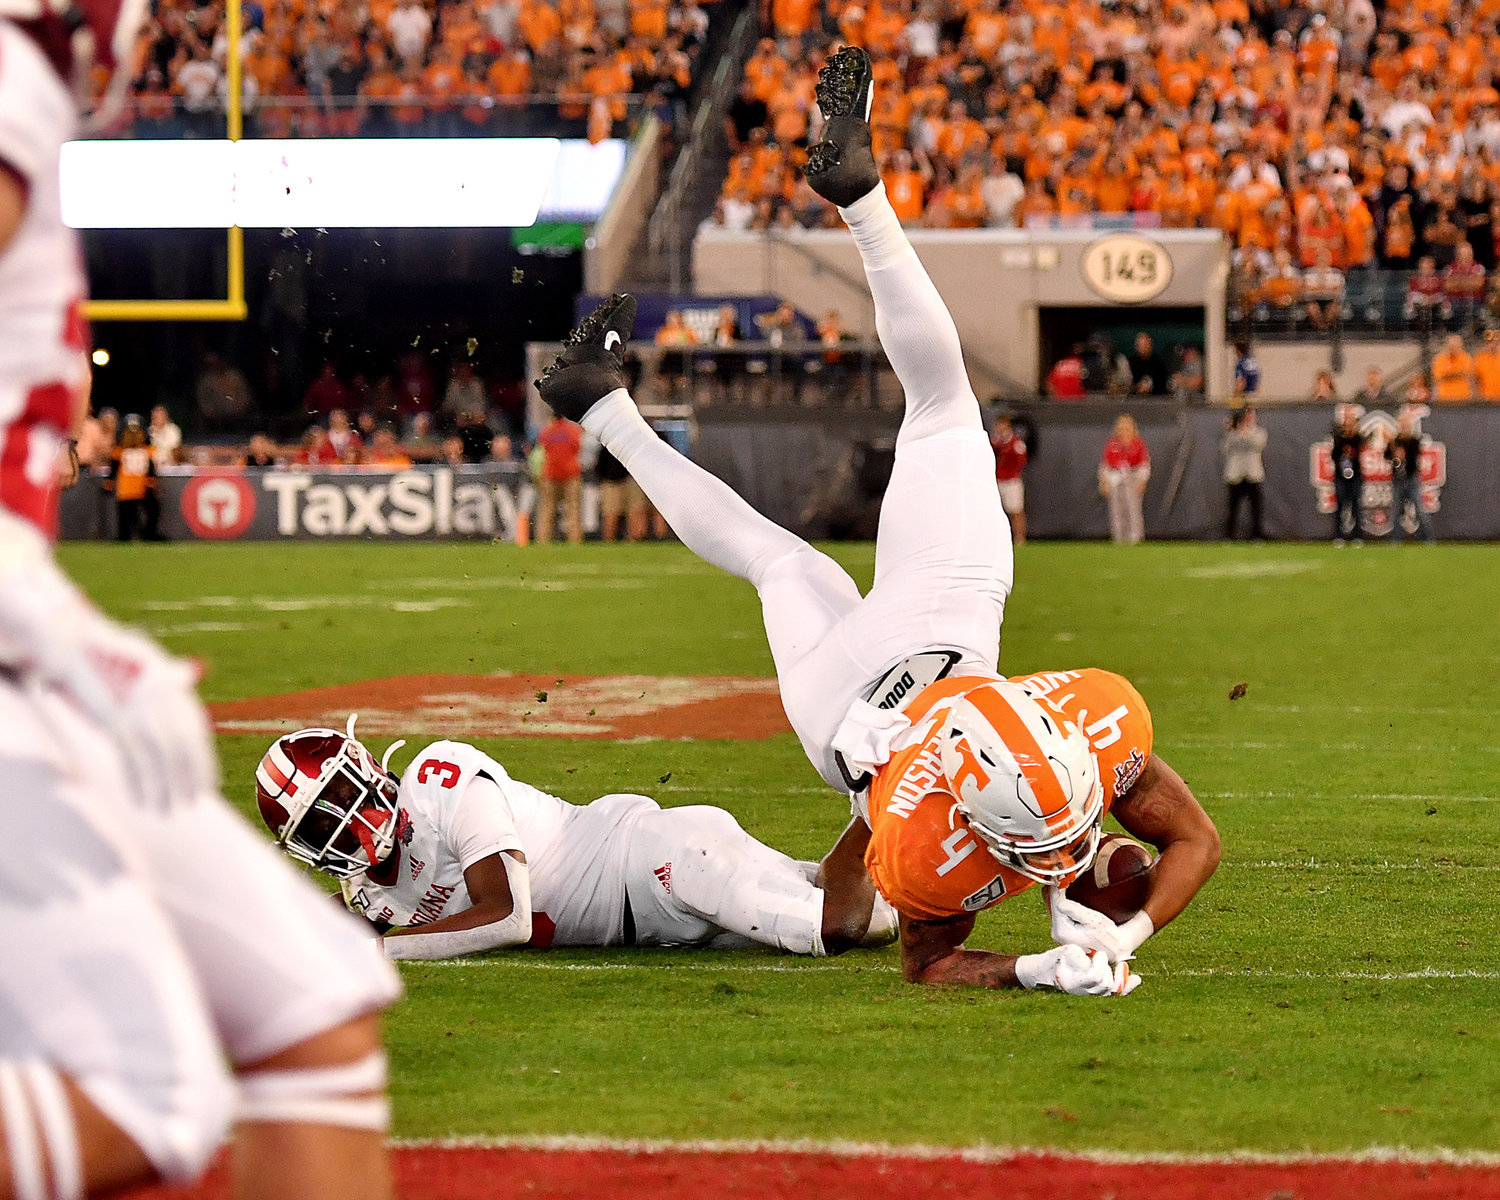 Tennessee Volunteers tight end Dominick Wood-Anderson (4) is upended after making a catch during the first half of the Gator Bowl NCAA football game against the Indiana Hoosiers Thursday, January 2, 2020, at TIAA Bank Field in Jacksonville, Fla.